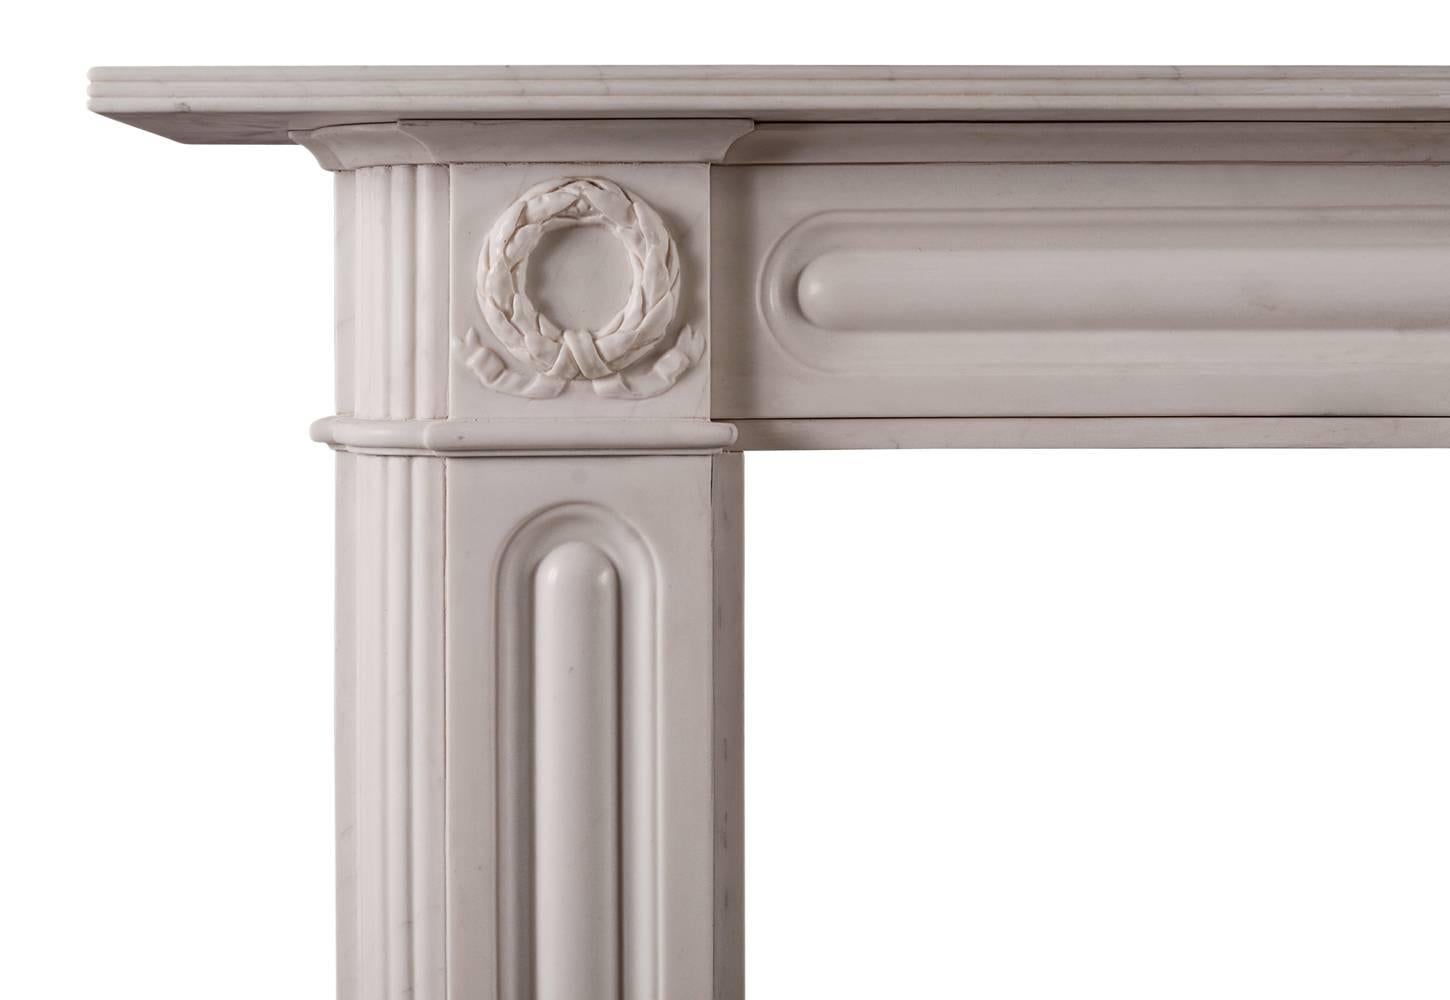 An English white marble fireplace in the Regency style. The panelled jambs with bowed reeding to returns and carved wreath with tied ribbons. The panelled frieze surmounted by reeded shelf above. A good quality copy of a period piece.

Shelf Width -